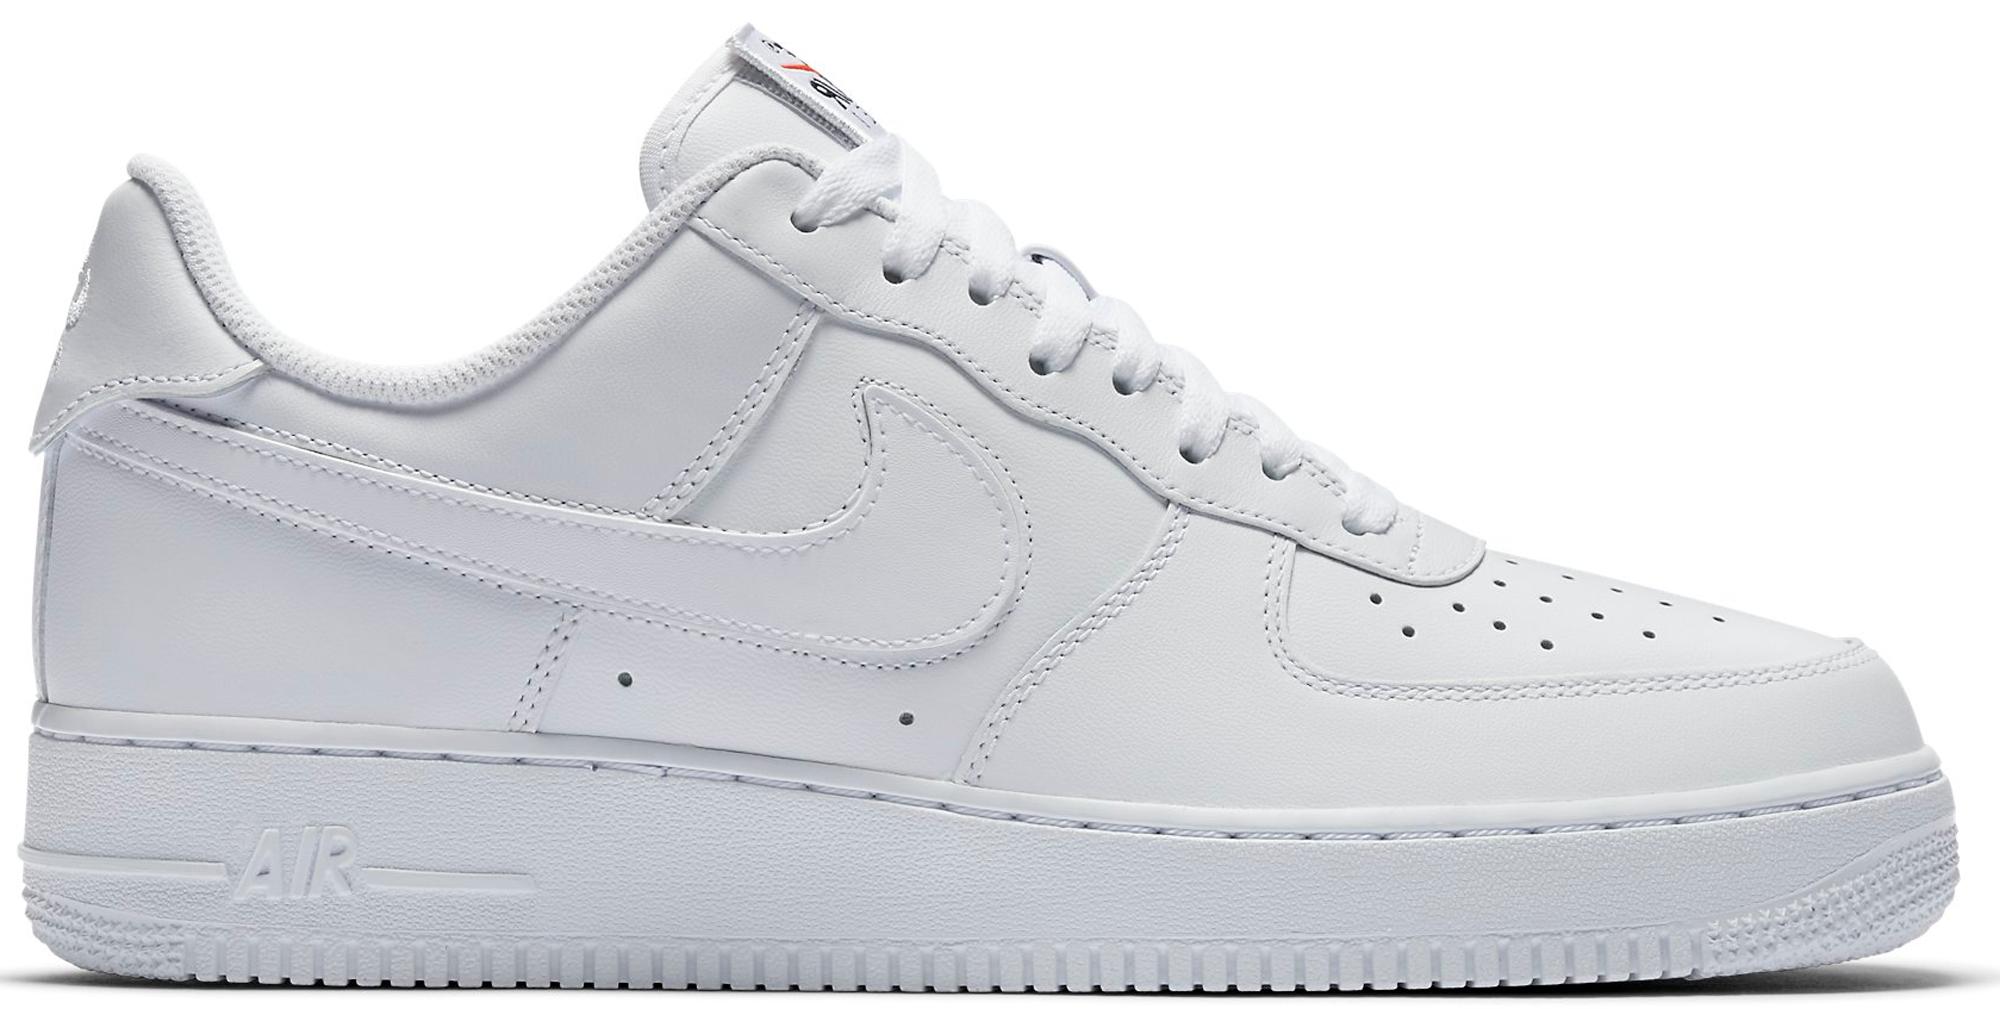 Nike Air Force 1 Low Swoosh Pack White All-Star 2018 - StockX News